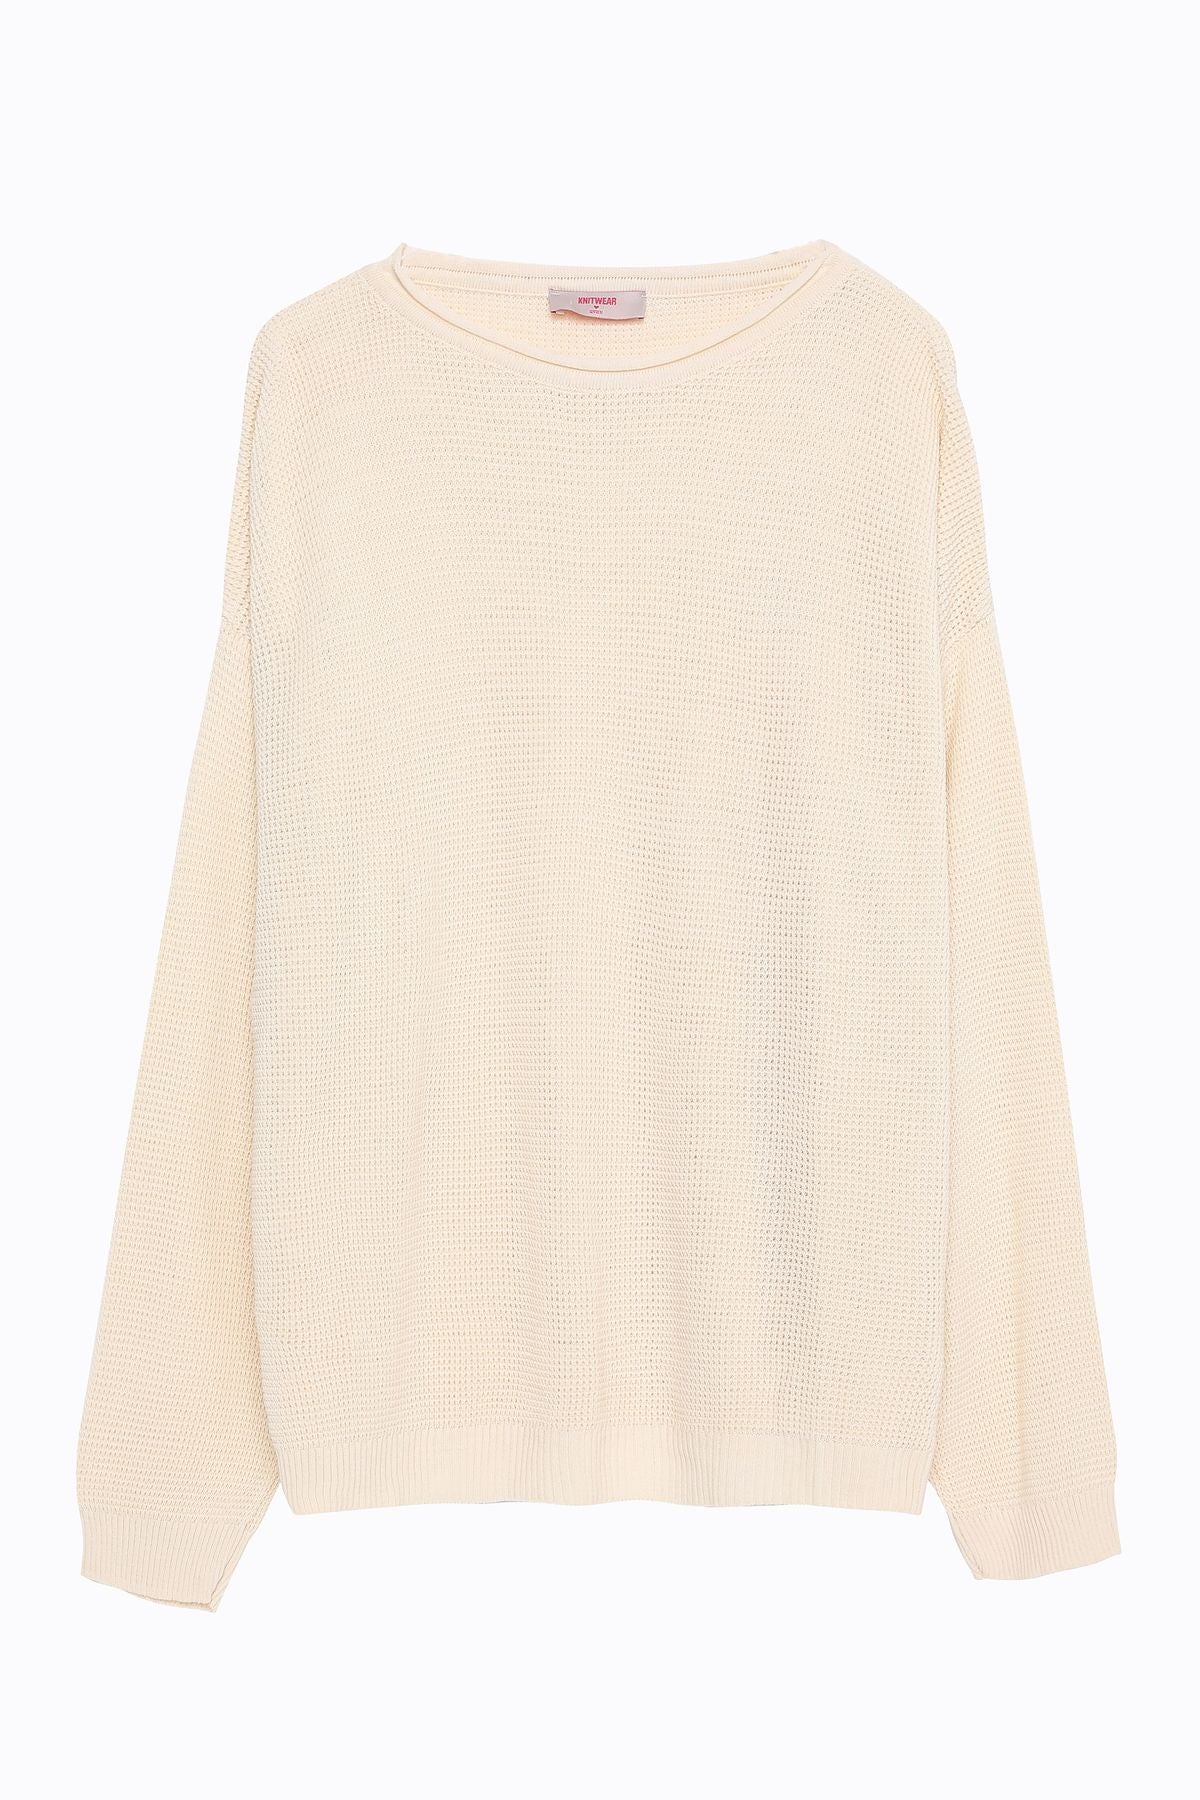 Knit Detailed Thin Sweater Cream